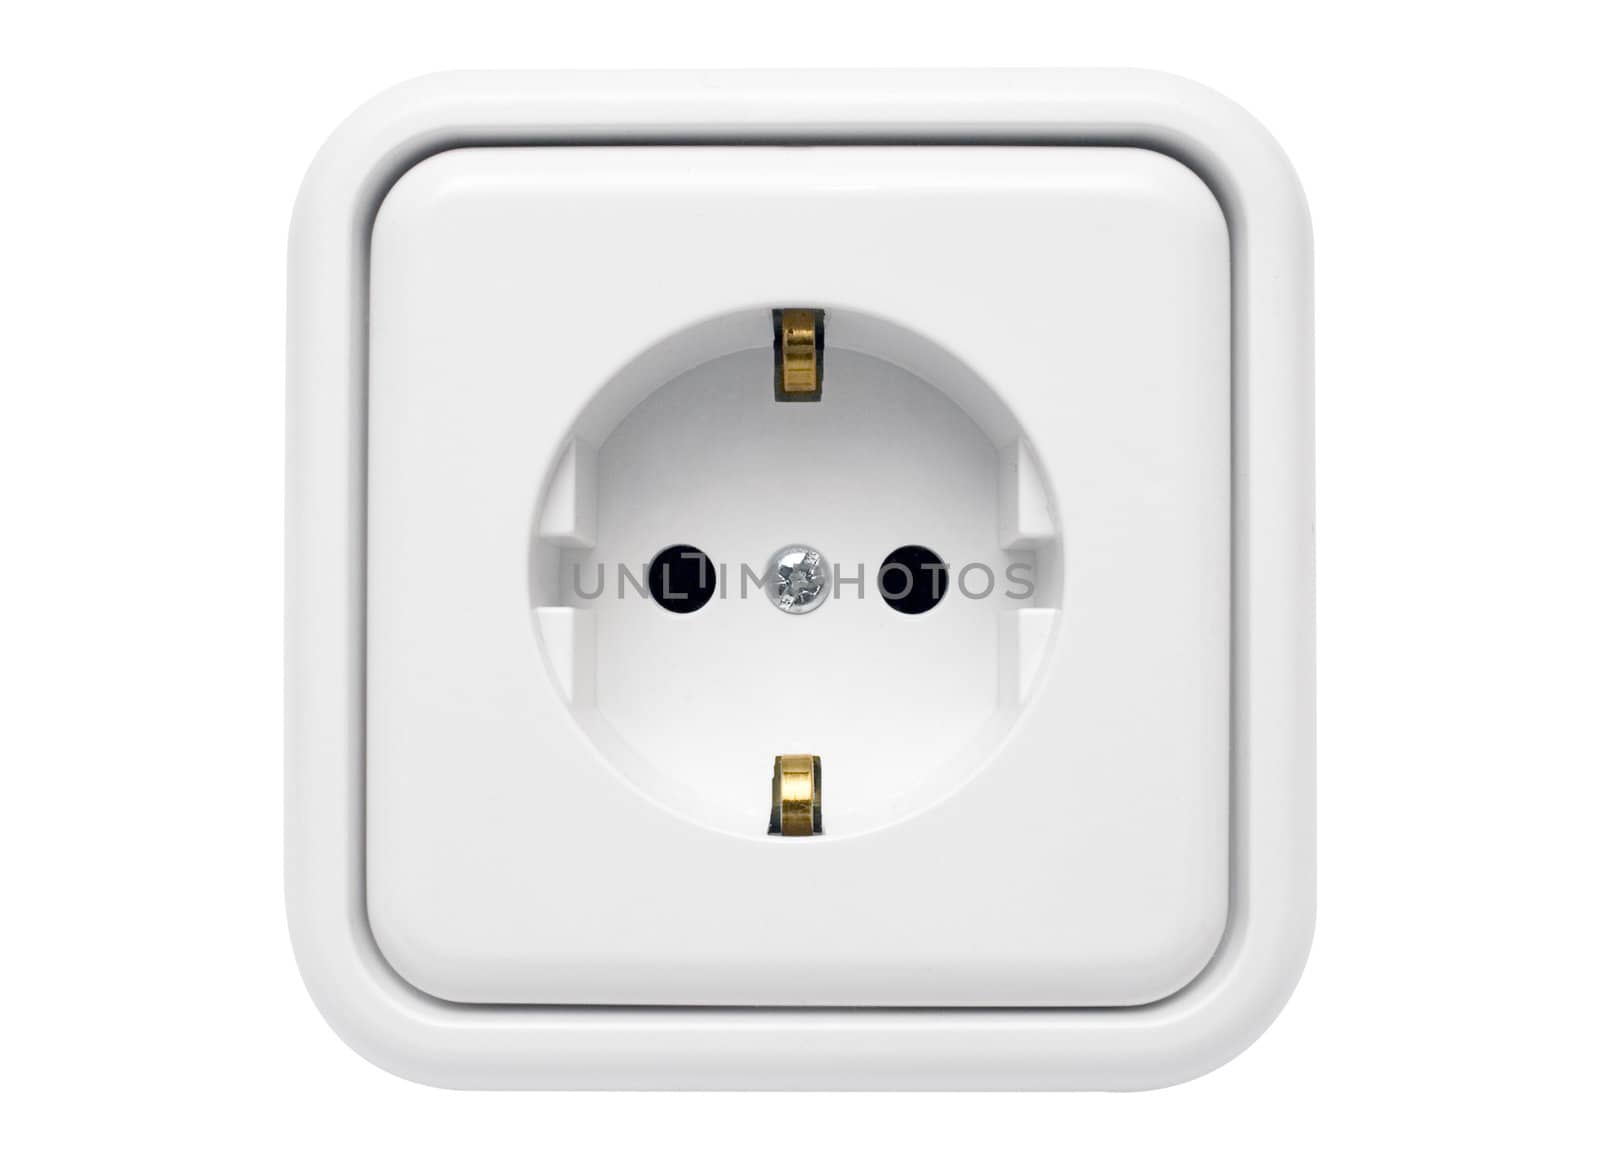 European power outlet isolated on a white background. File contains clipping path.